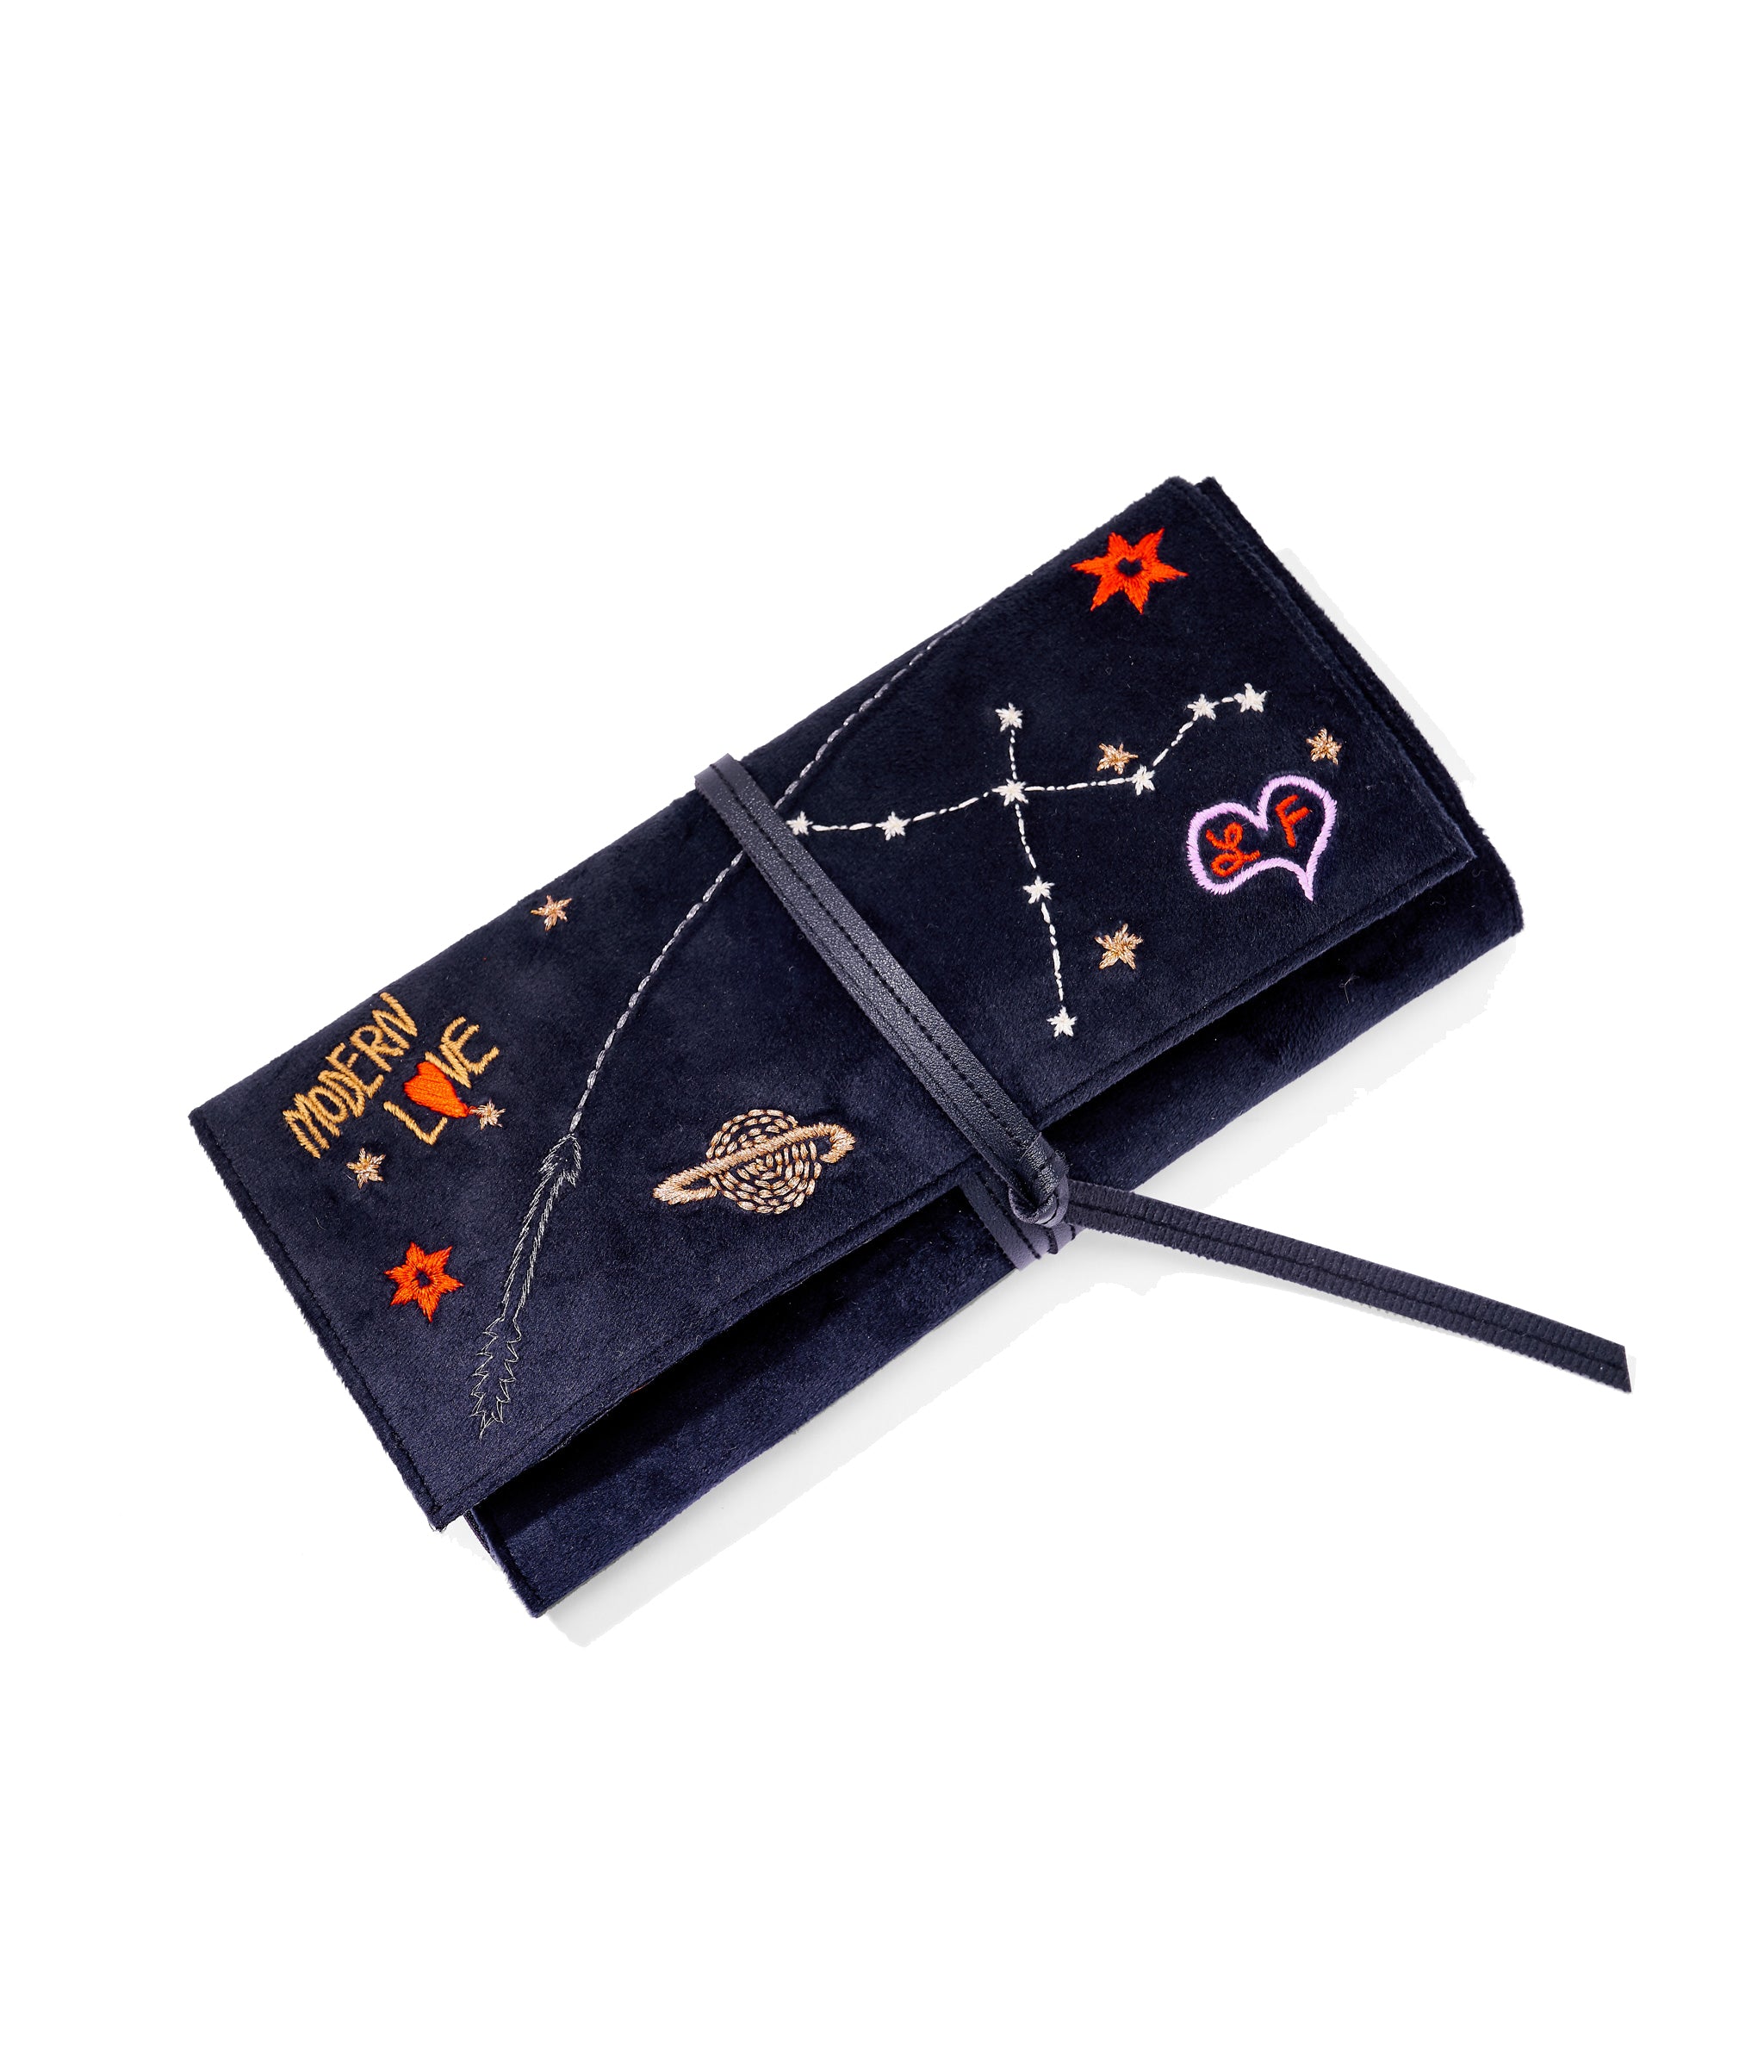 Modern Love Jewelry Roll. Black velvet with vegan leather tie, embroidered with zodiac-inspired illustrations.